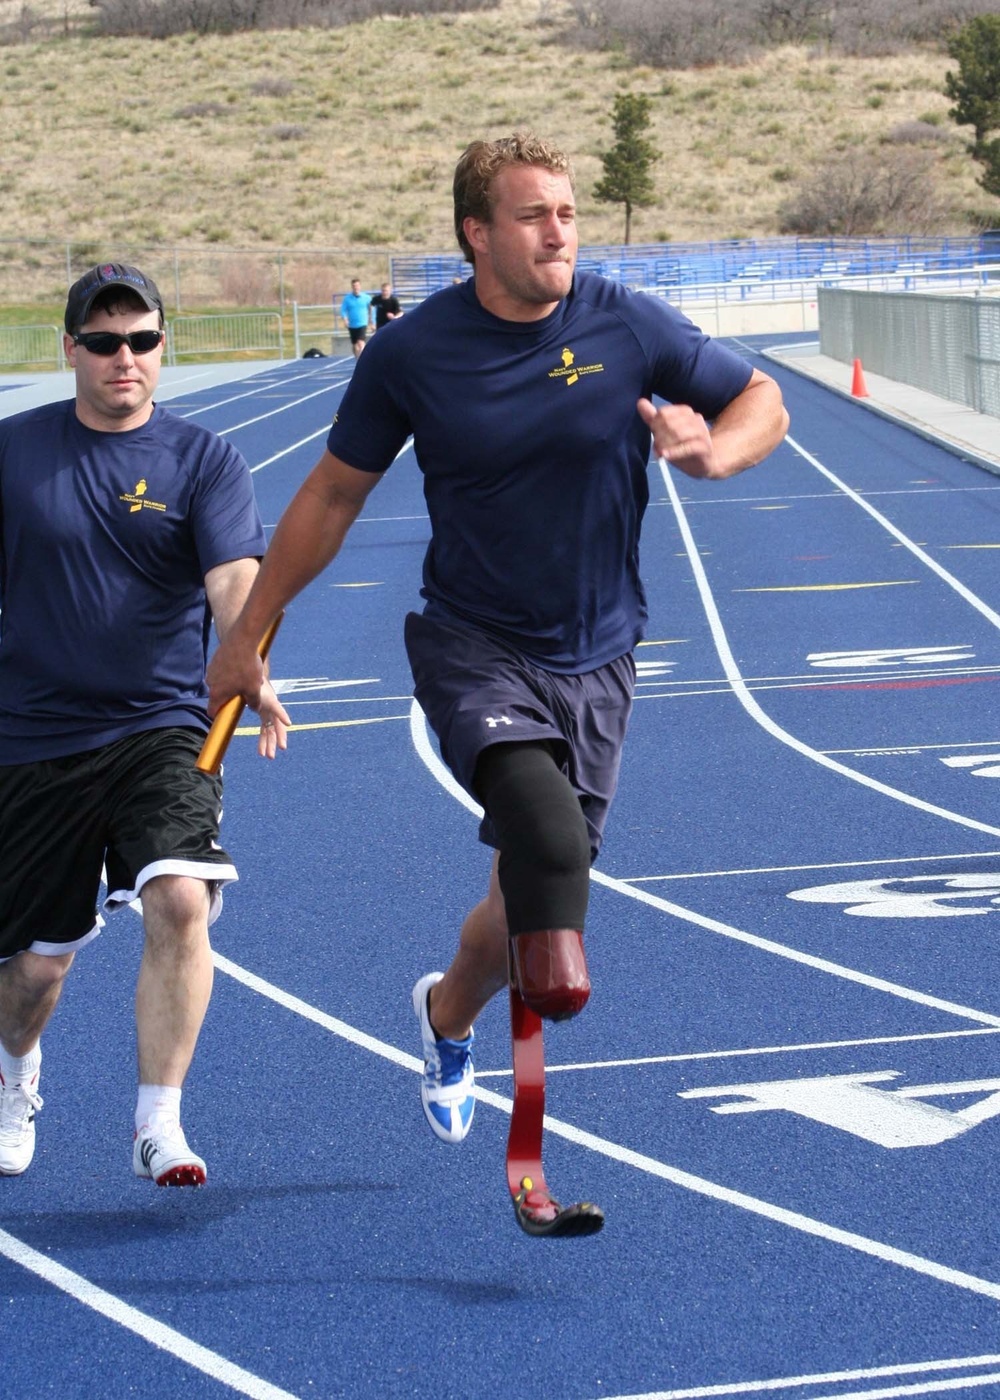 Warrior Games 2013 - Track and Field Practice